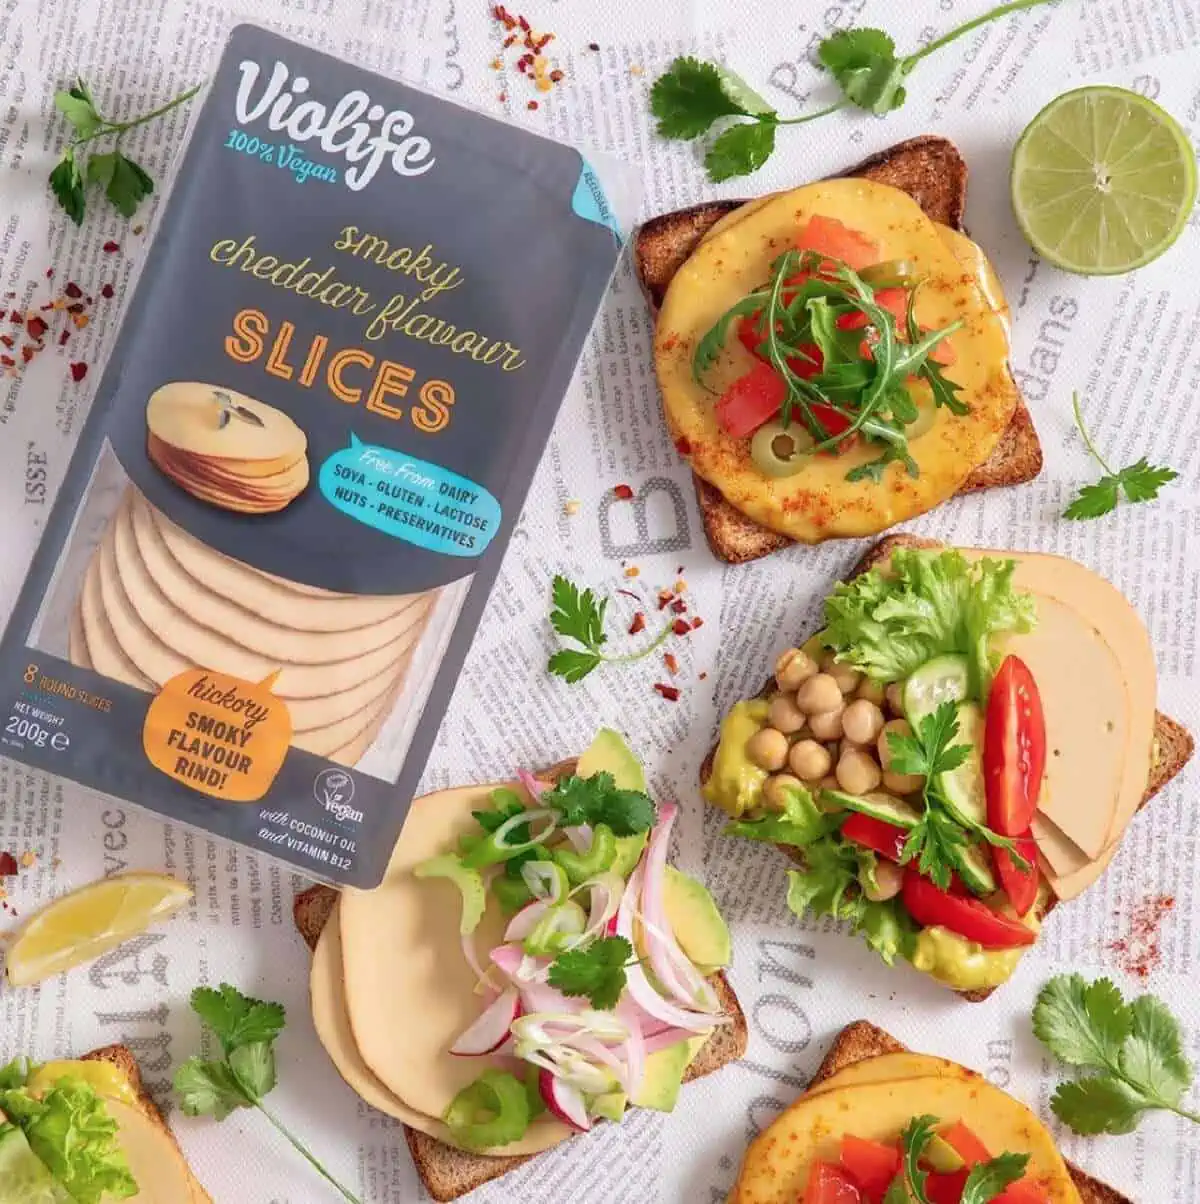 Violife 100% Vegan Cheese Slices next to three plant-based, open-faced toast sandwiches on a newspaper background. 